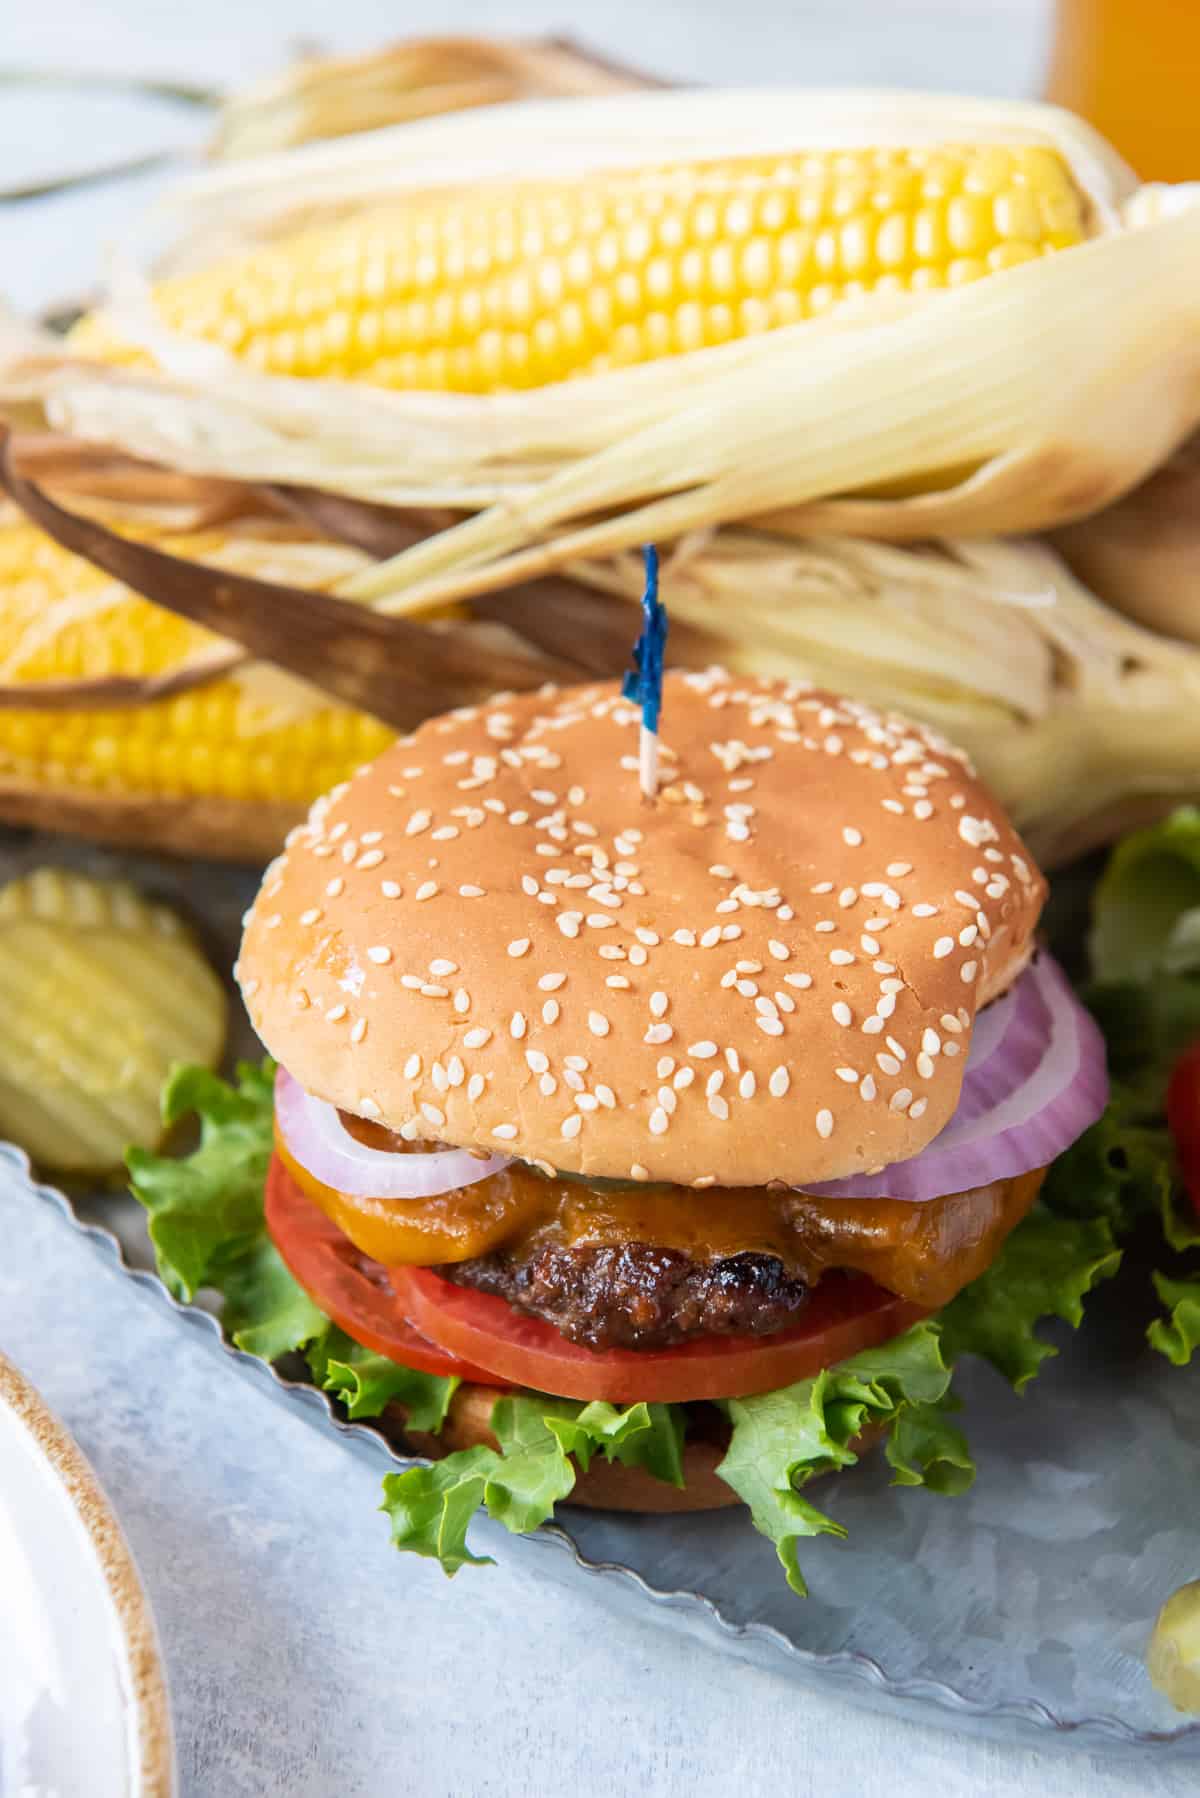 A burger on a silver platter with corn on the cob.